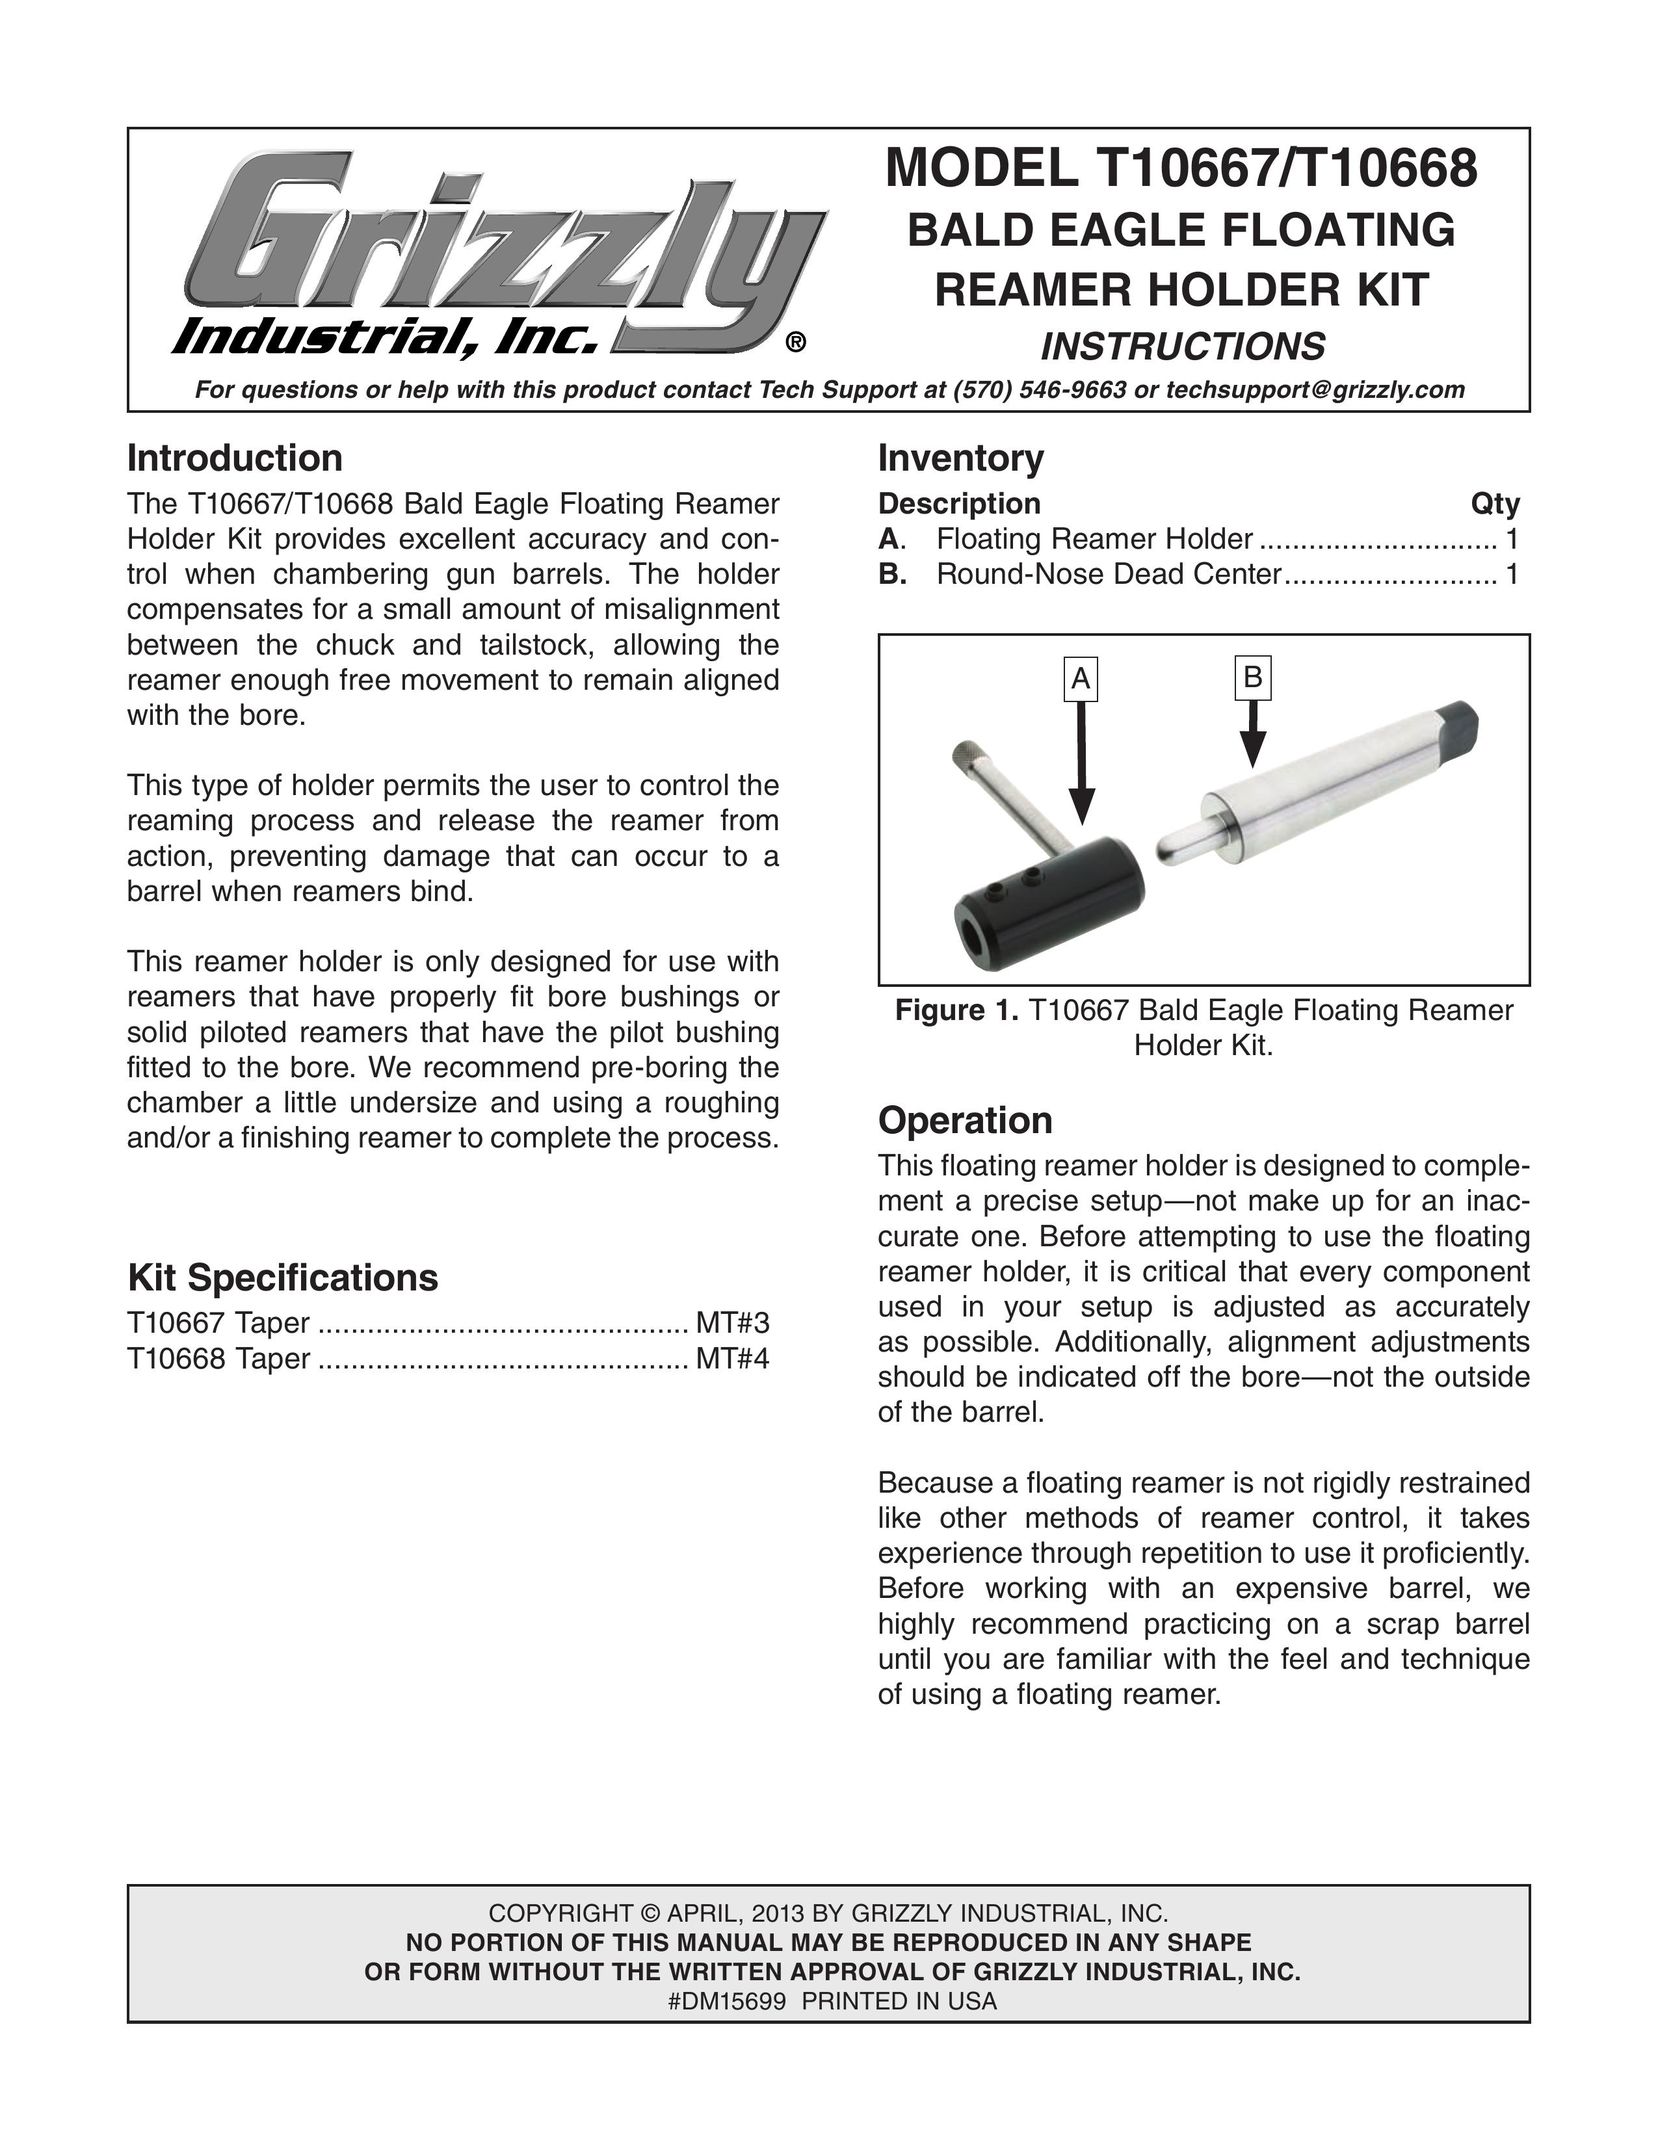 Grizzly T10668 Plumbing Product User Manual